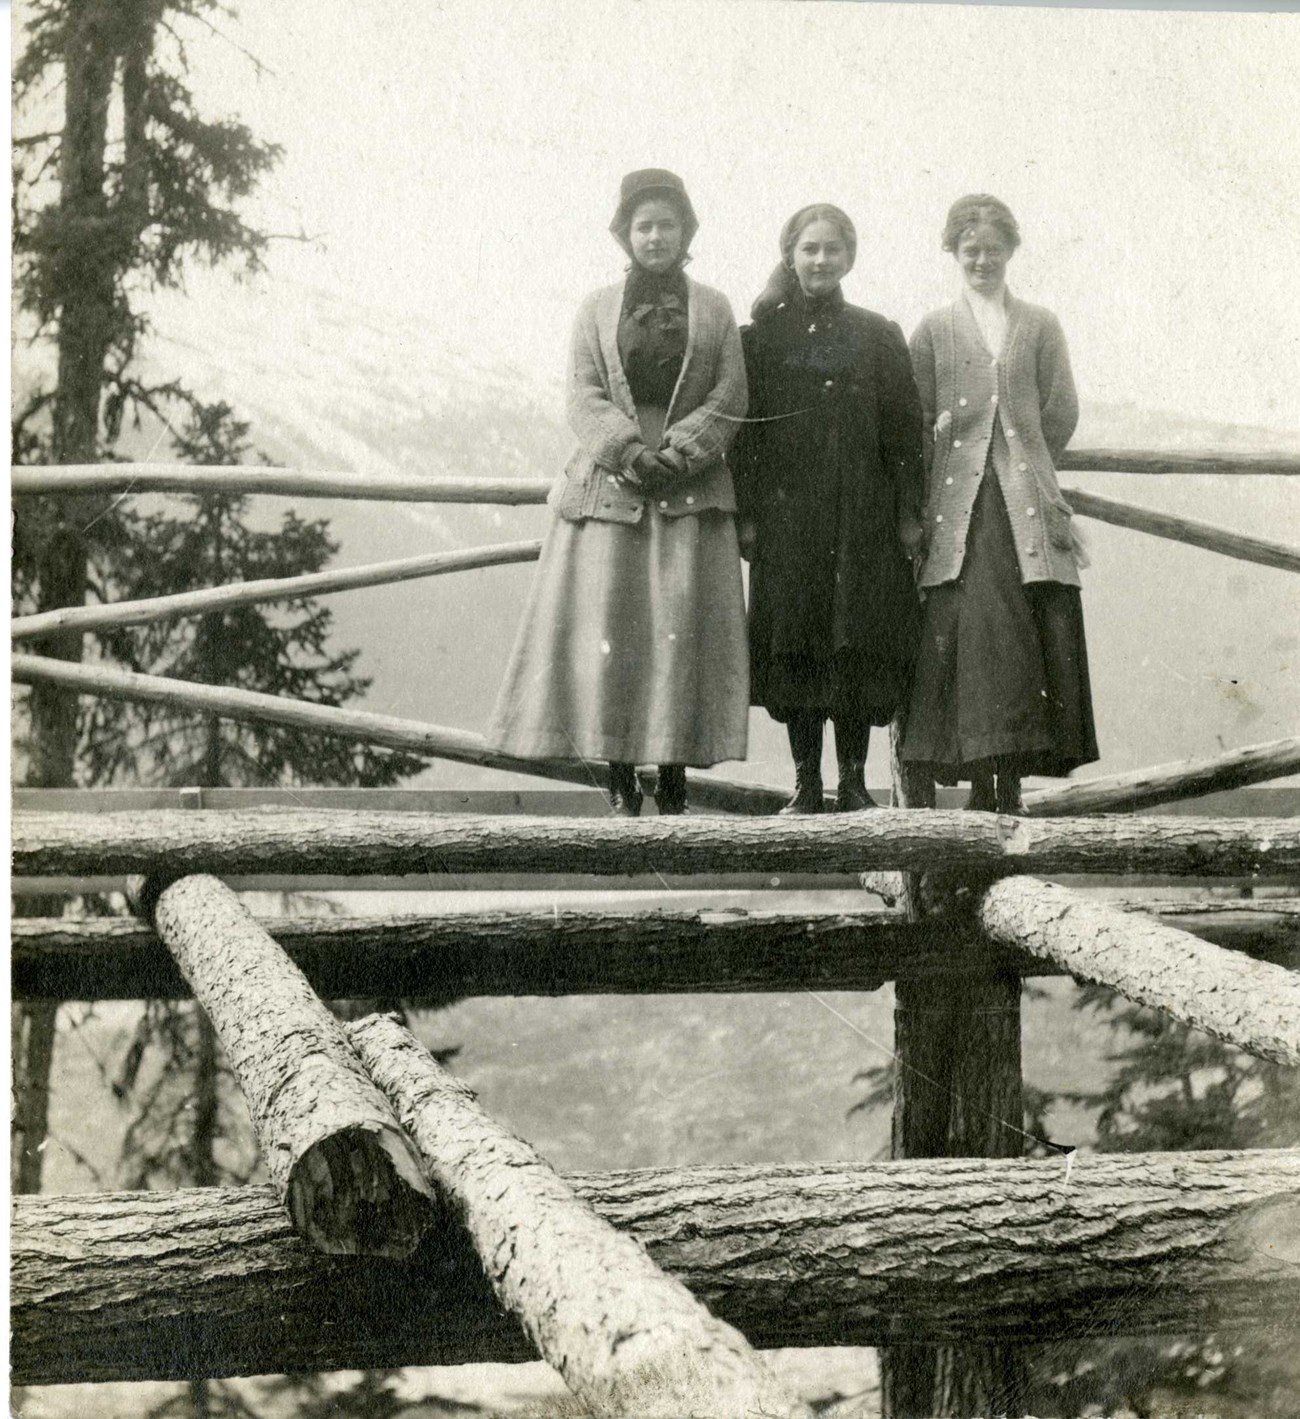 Three woman stand on a stack of logs in dresses